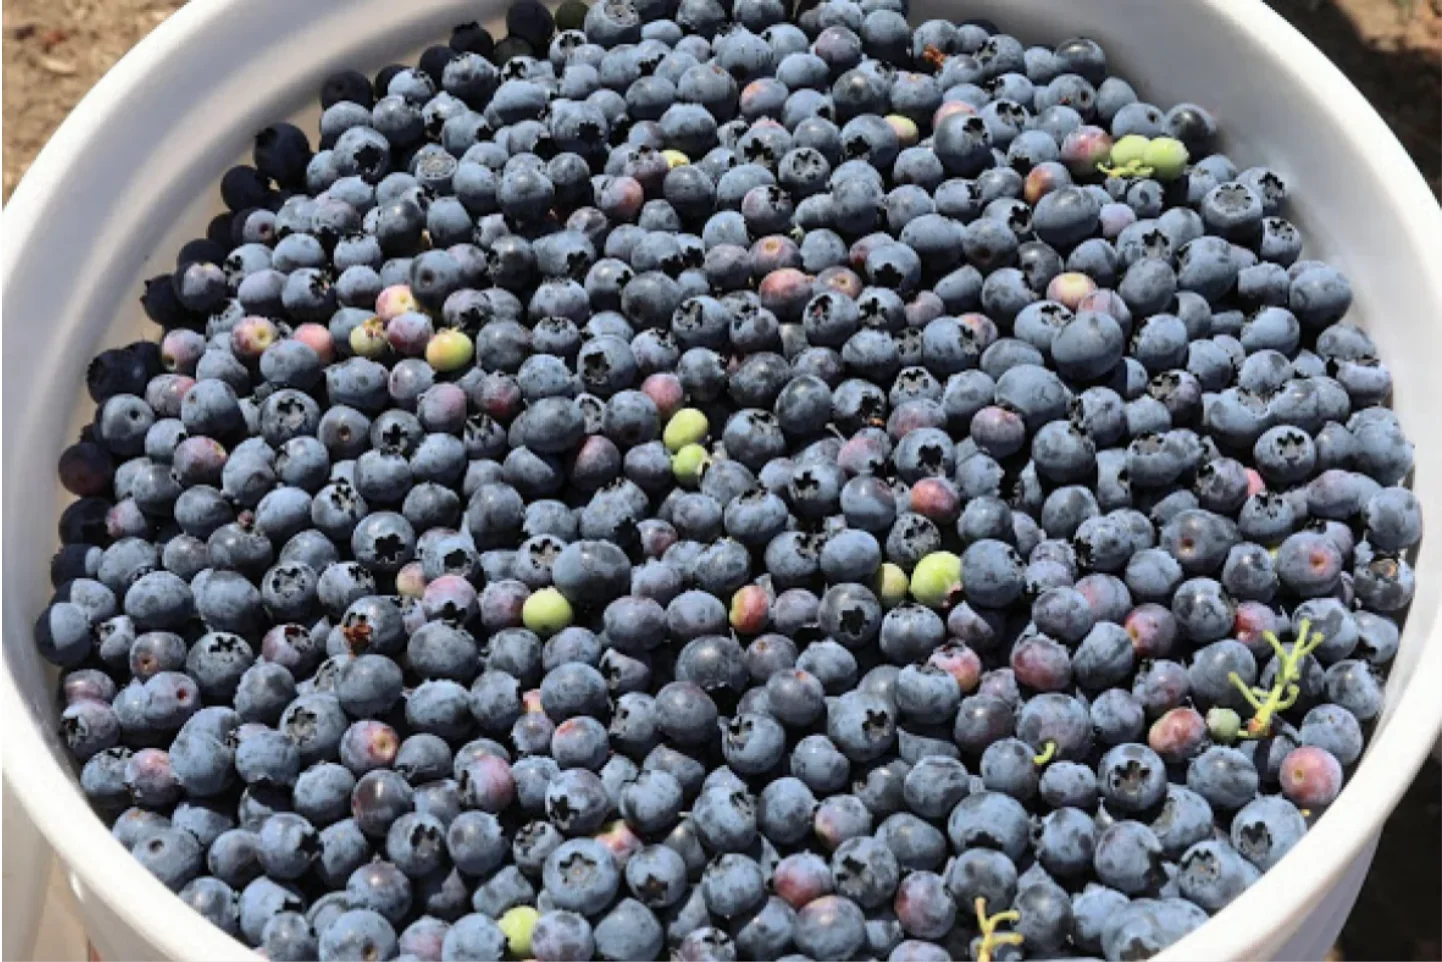 CBC: With nighttime temperatures of around 30 C, fruits had little time to cool down between scorching days. Pictured is a normal blueberry crop. (Michael Mcarthur)